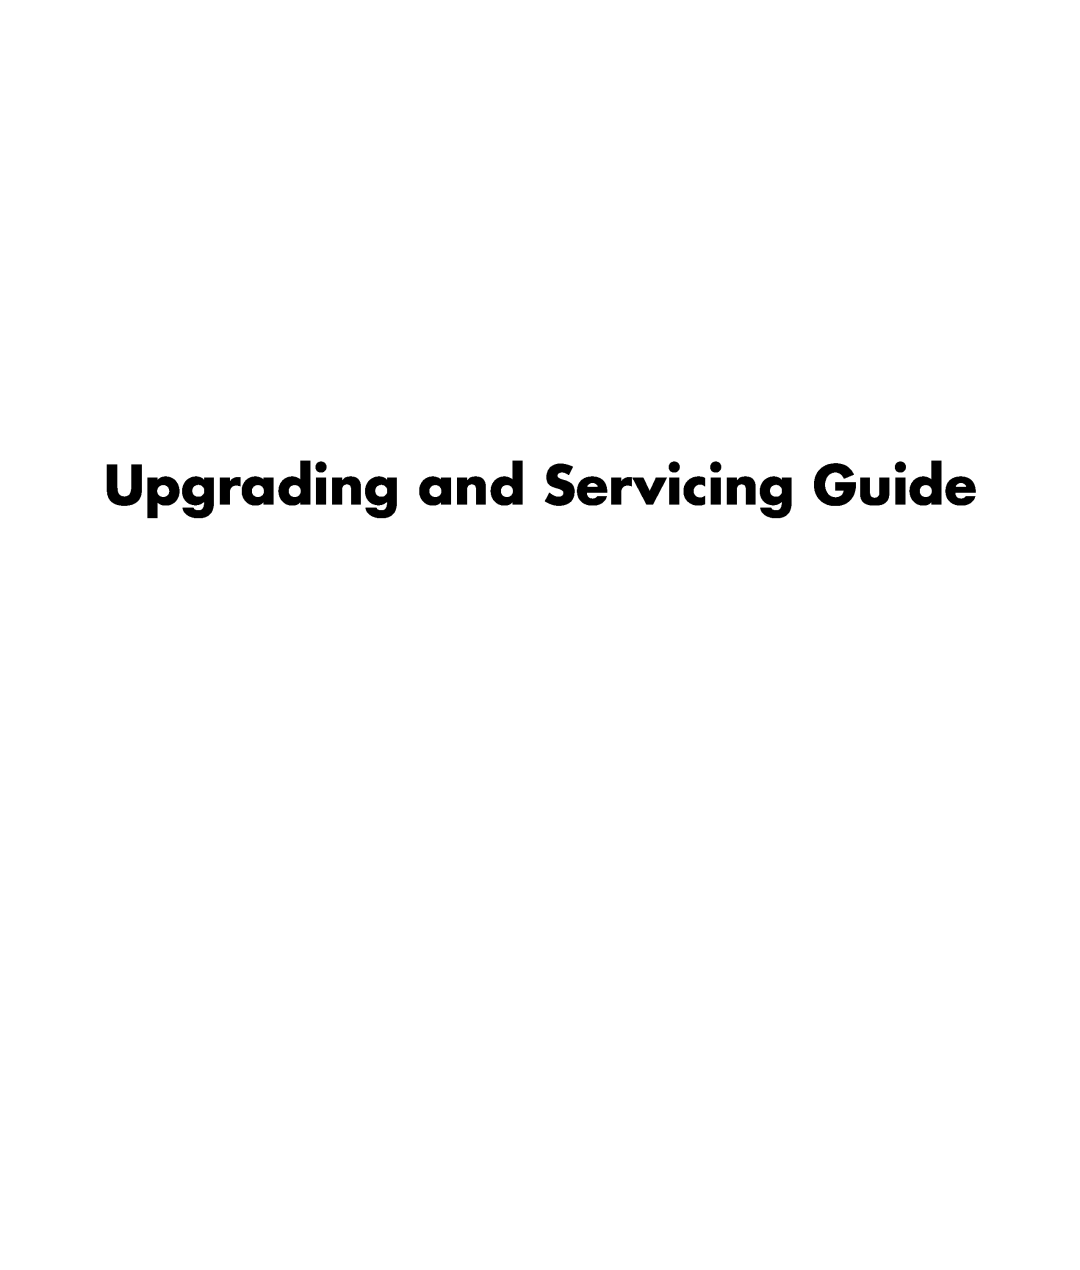 HP m1050y (PJ720AV), m1299a, m1050e (PU061AV), m1050y (PU060AV), m1050e (PJ622AV), m1297c manual Upgrading and Servicing Guide 